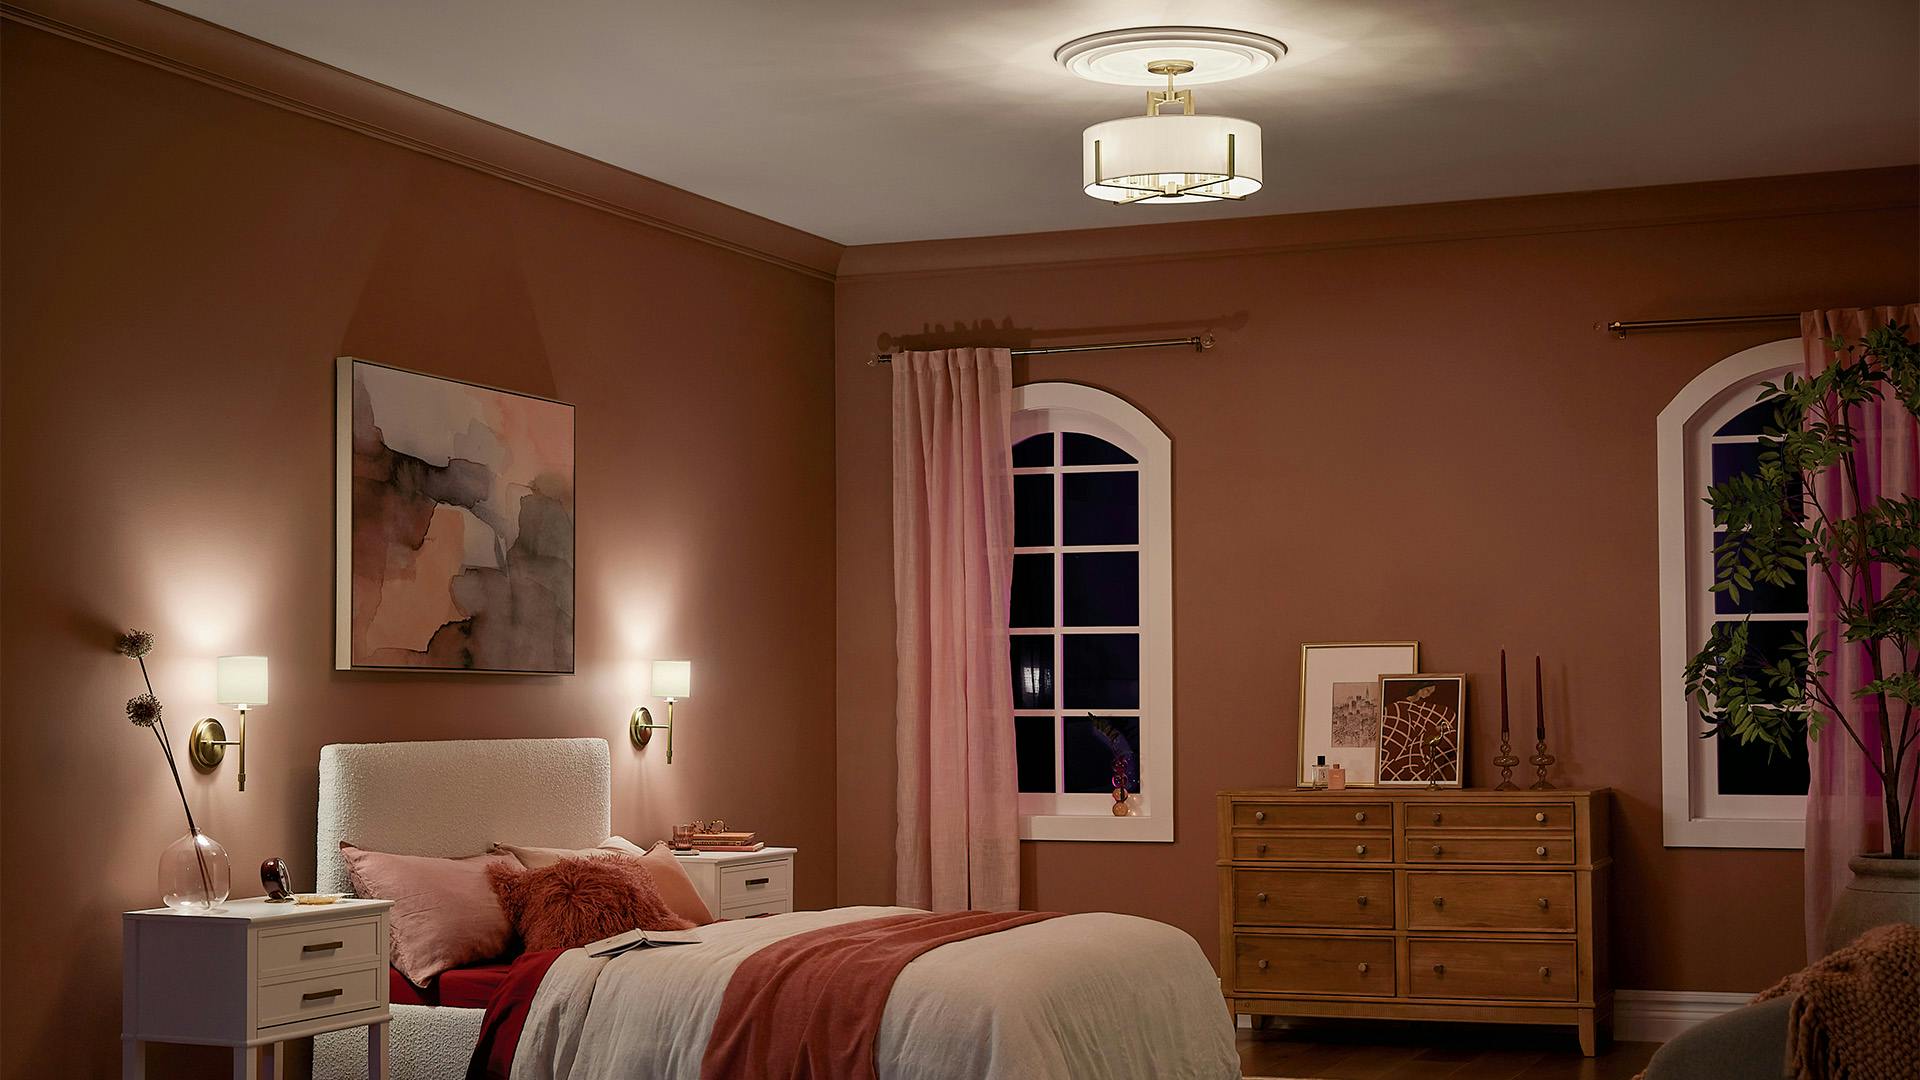 Bedroom at night with Malen ceiling light in classic pewter.